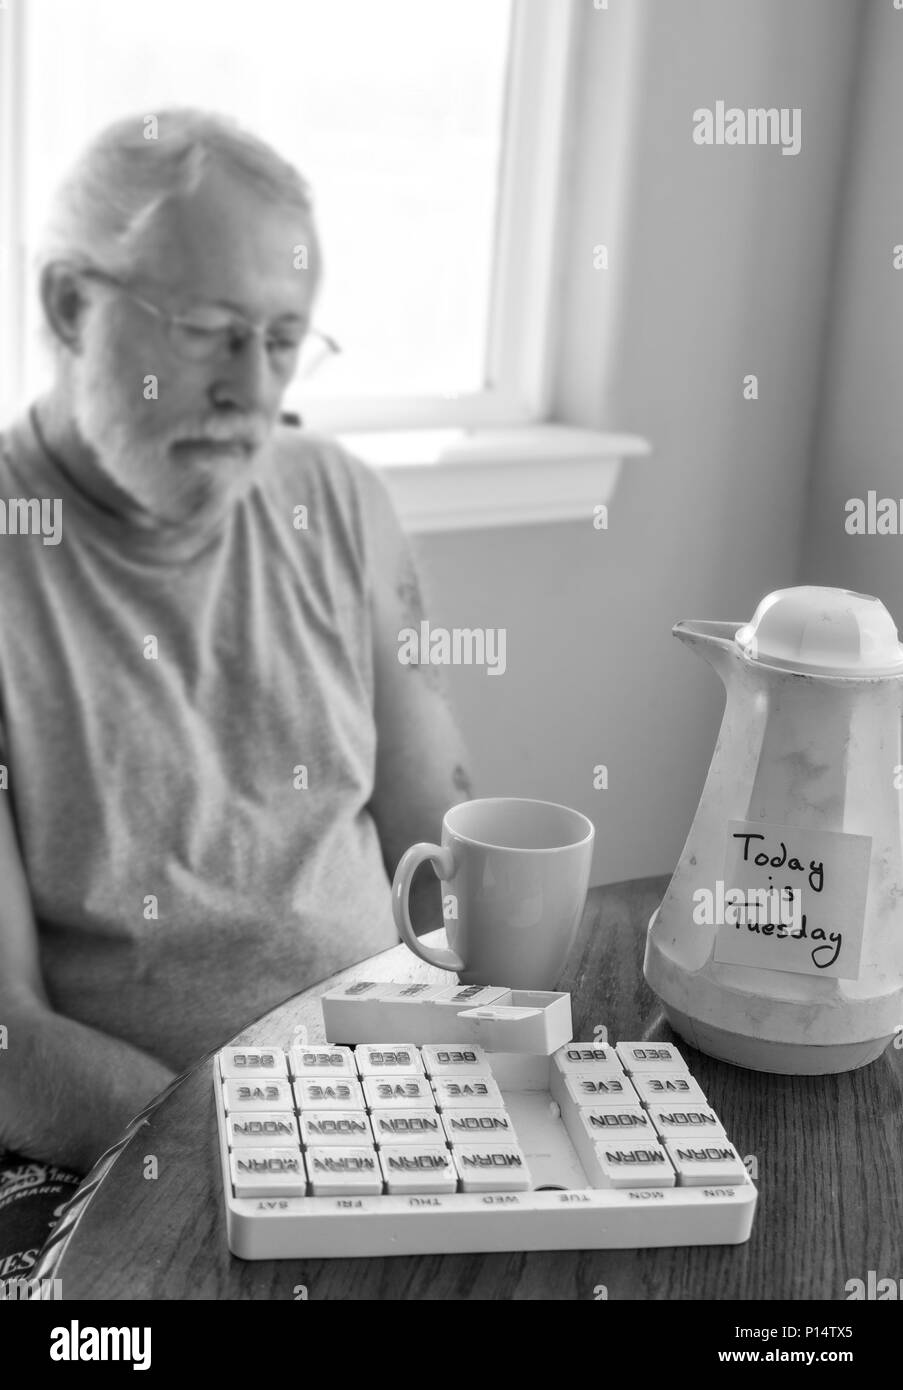 blurred image of sad man with post it note on old coffee carafe to remind him of the day of the week Stock Photo